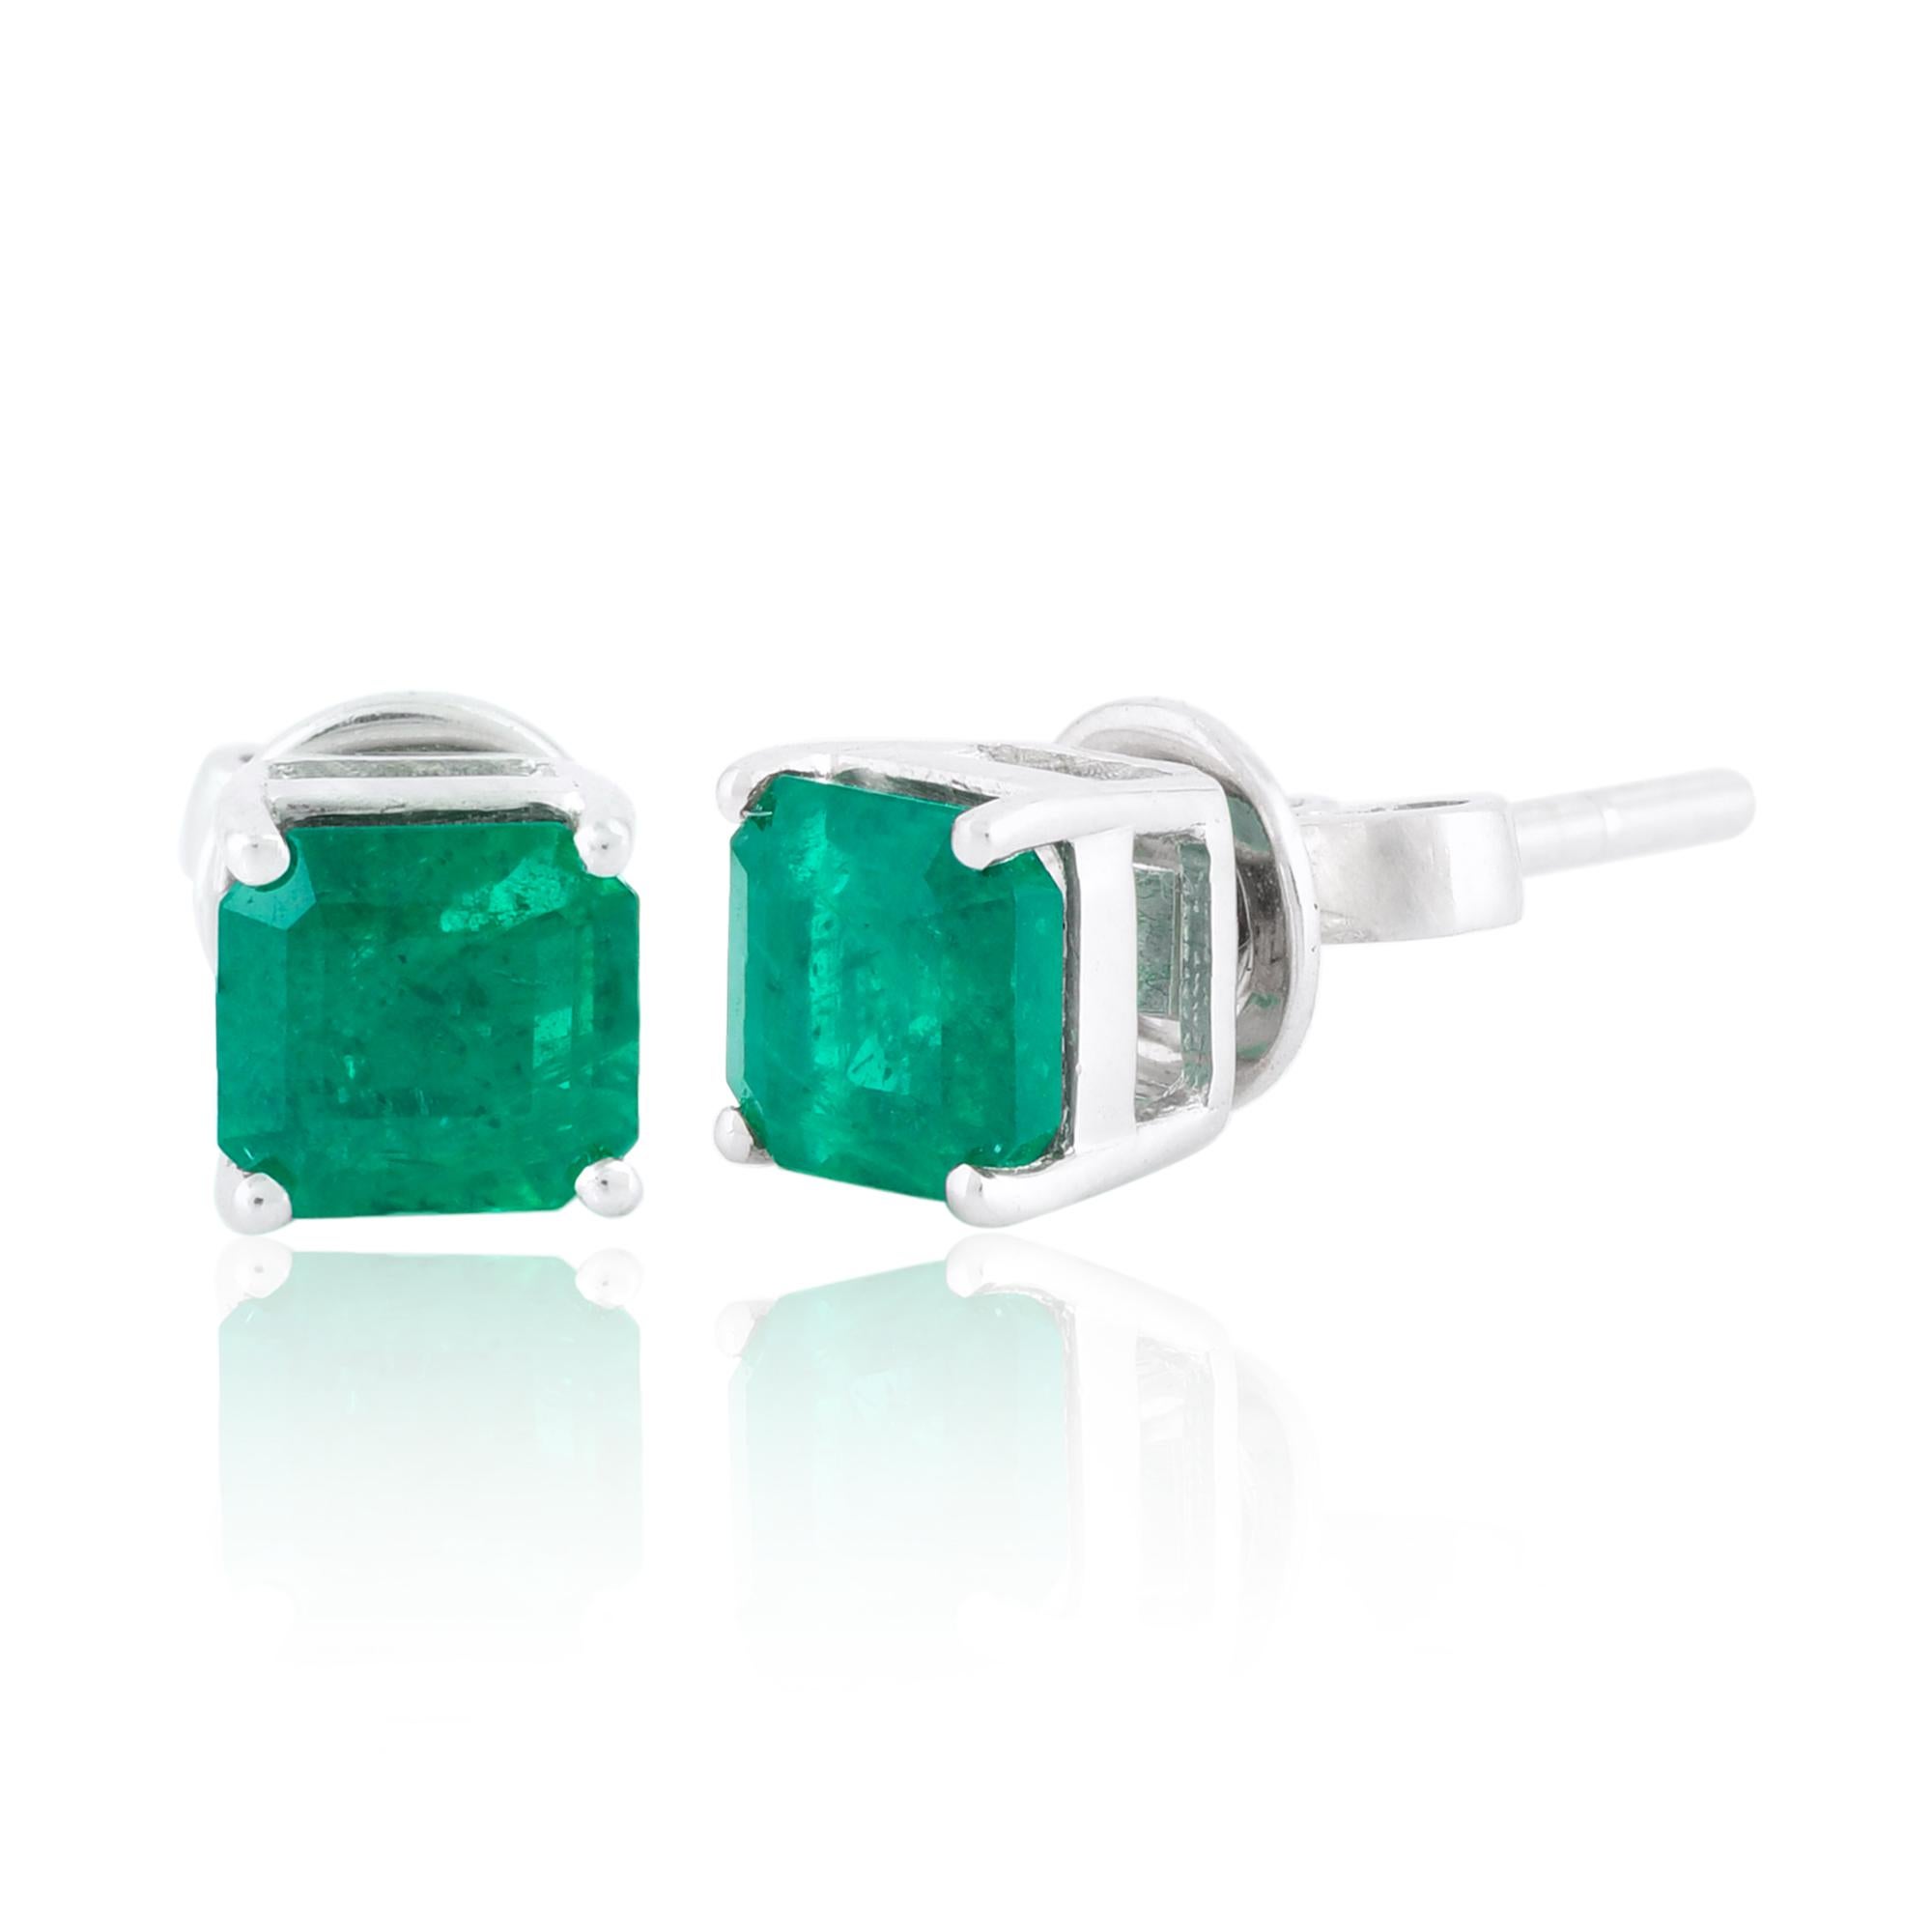 Item Code :- SEE-11835
Gross Weight :- 1.89 gm
18k White Gold Weight :- 1.66 gm
Emerald Weight :- 1.16 carat
Earrings Length :- 5 mm approx.
✦ Sizing
.....................
We can adjust most items to fit your sizing preferences. Most items can be